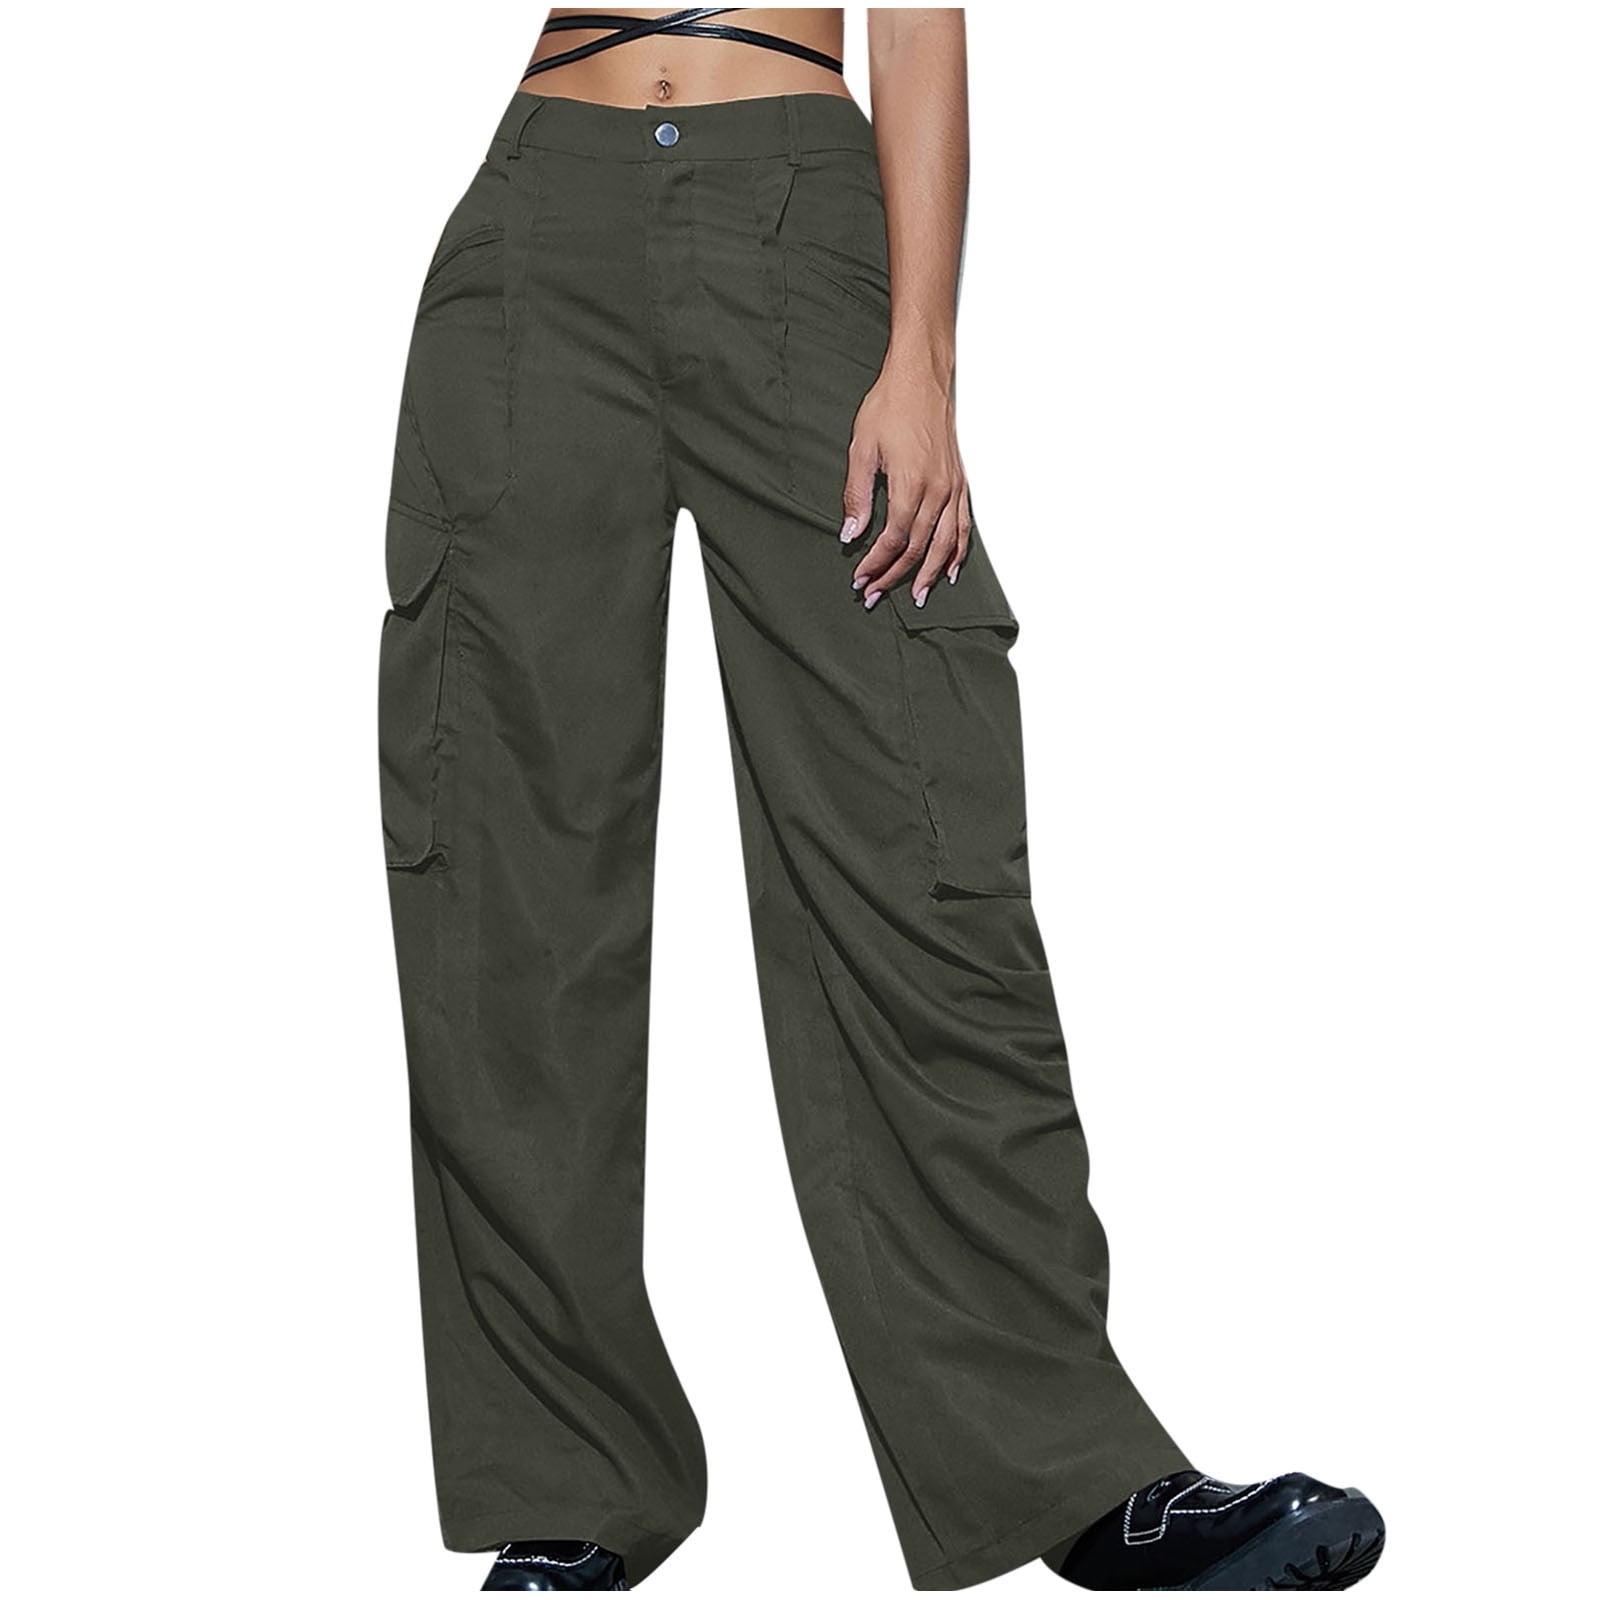 JWZUY High Waist Baggy Cargo Pants for Women Flap Pocket Relaxed Fit Straight  Wide Leg Outdoor Pants Army Green XS 